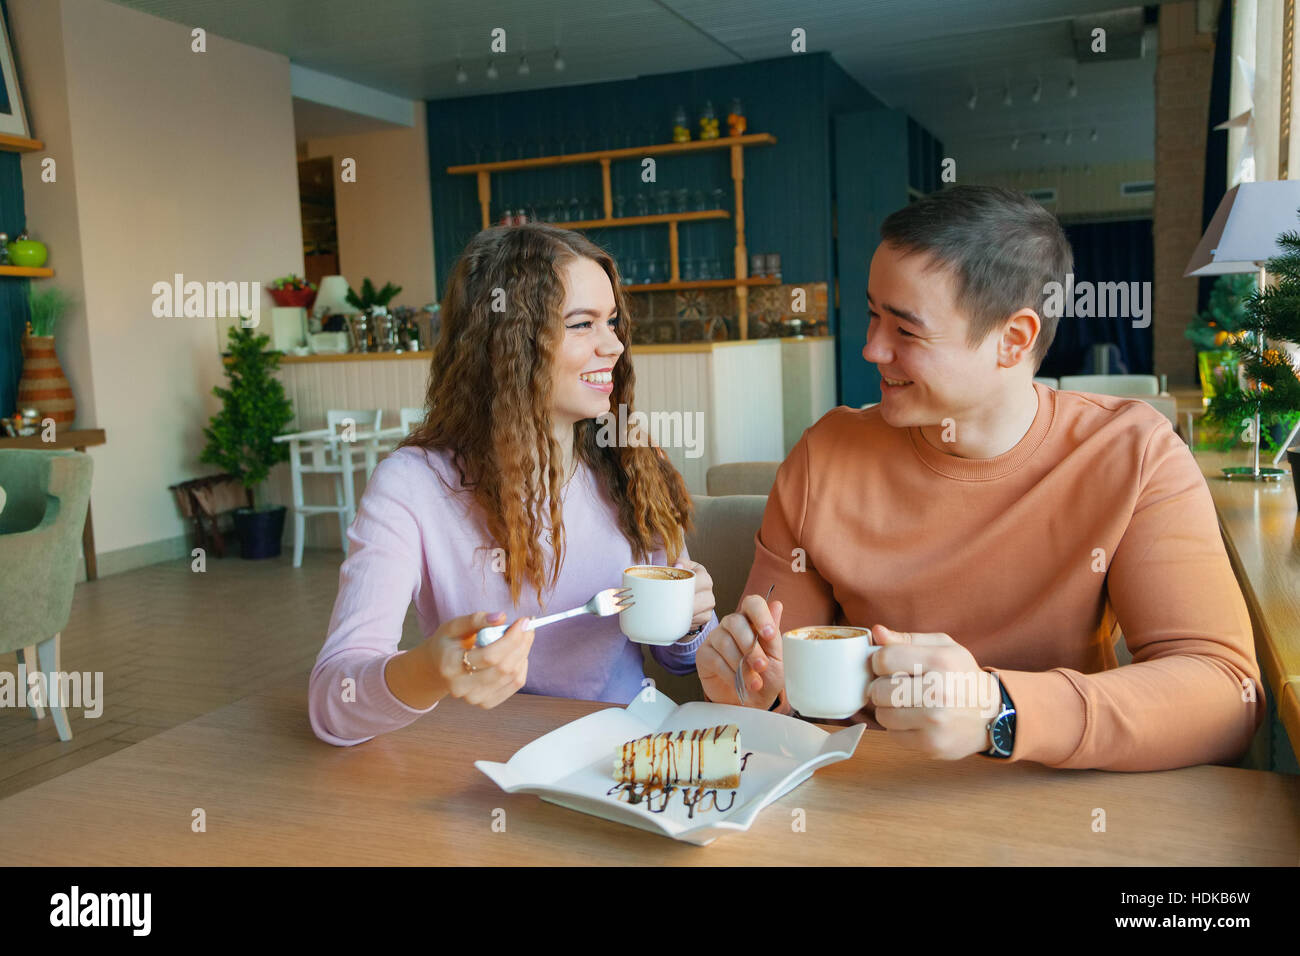 woman and a man in cafe Stock Photo